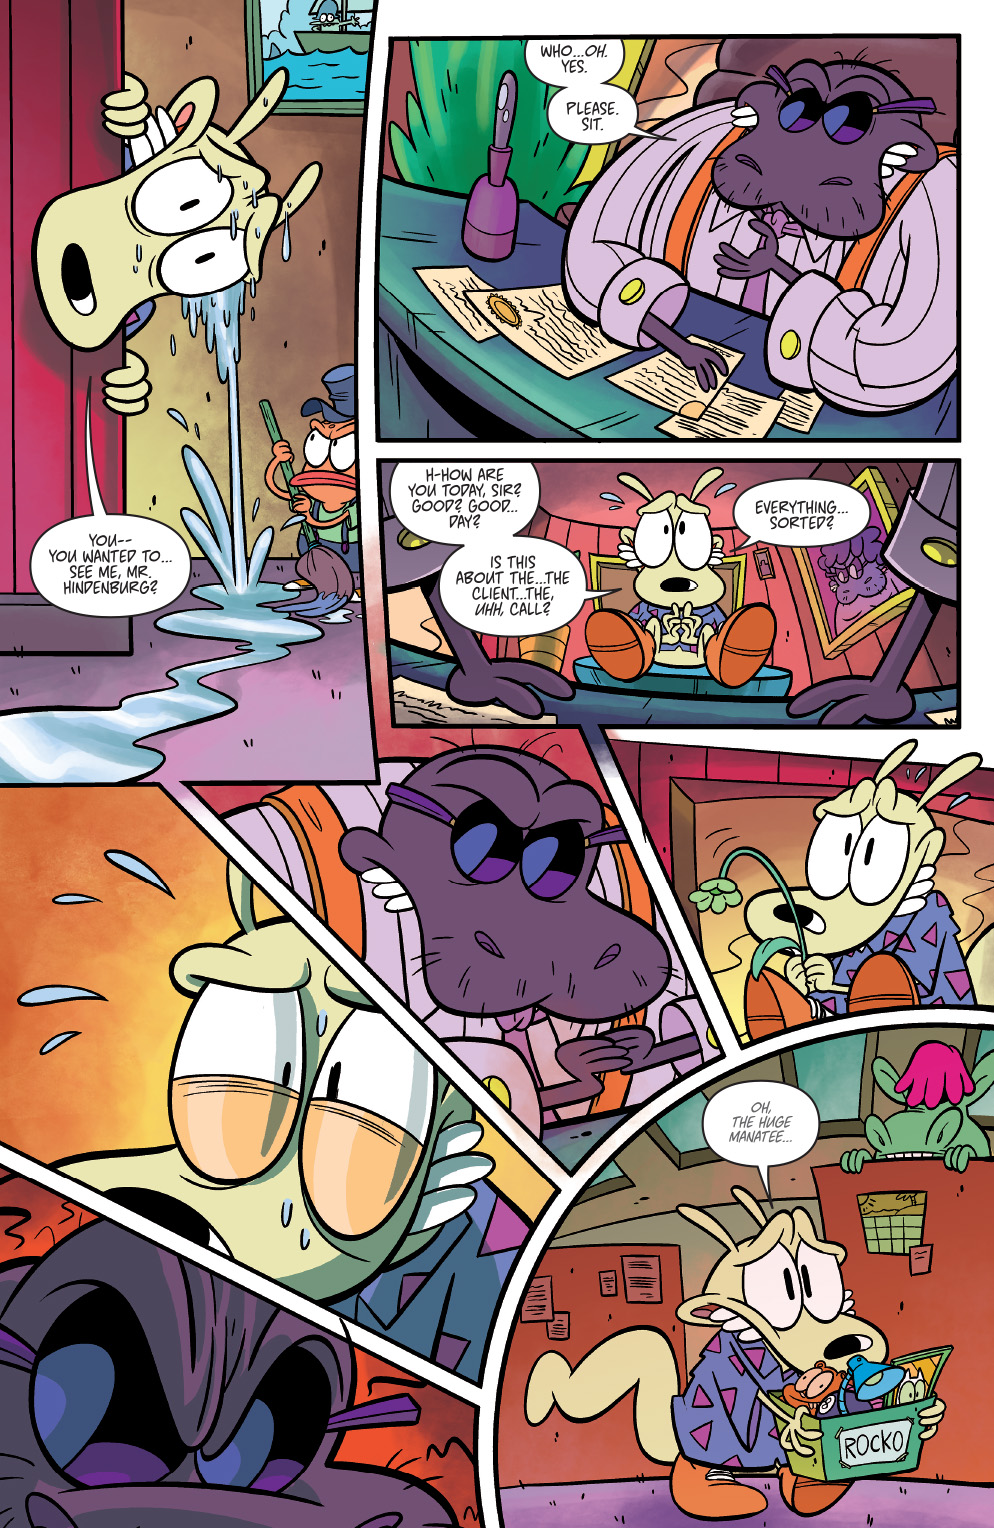 Rocko’sModernLife_001_Preview_02